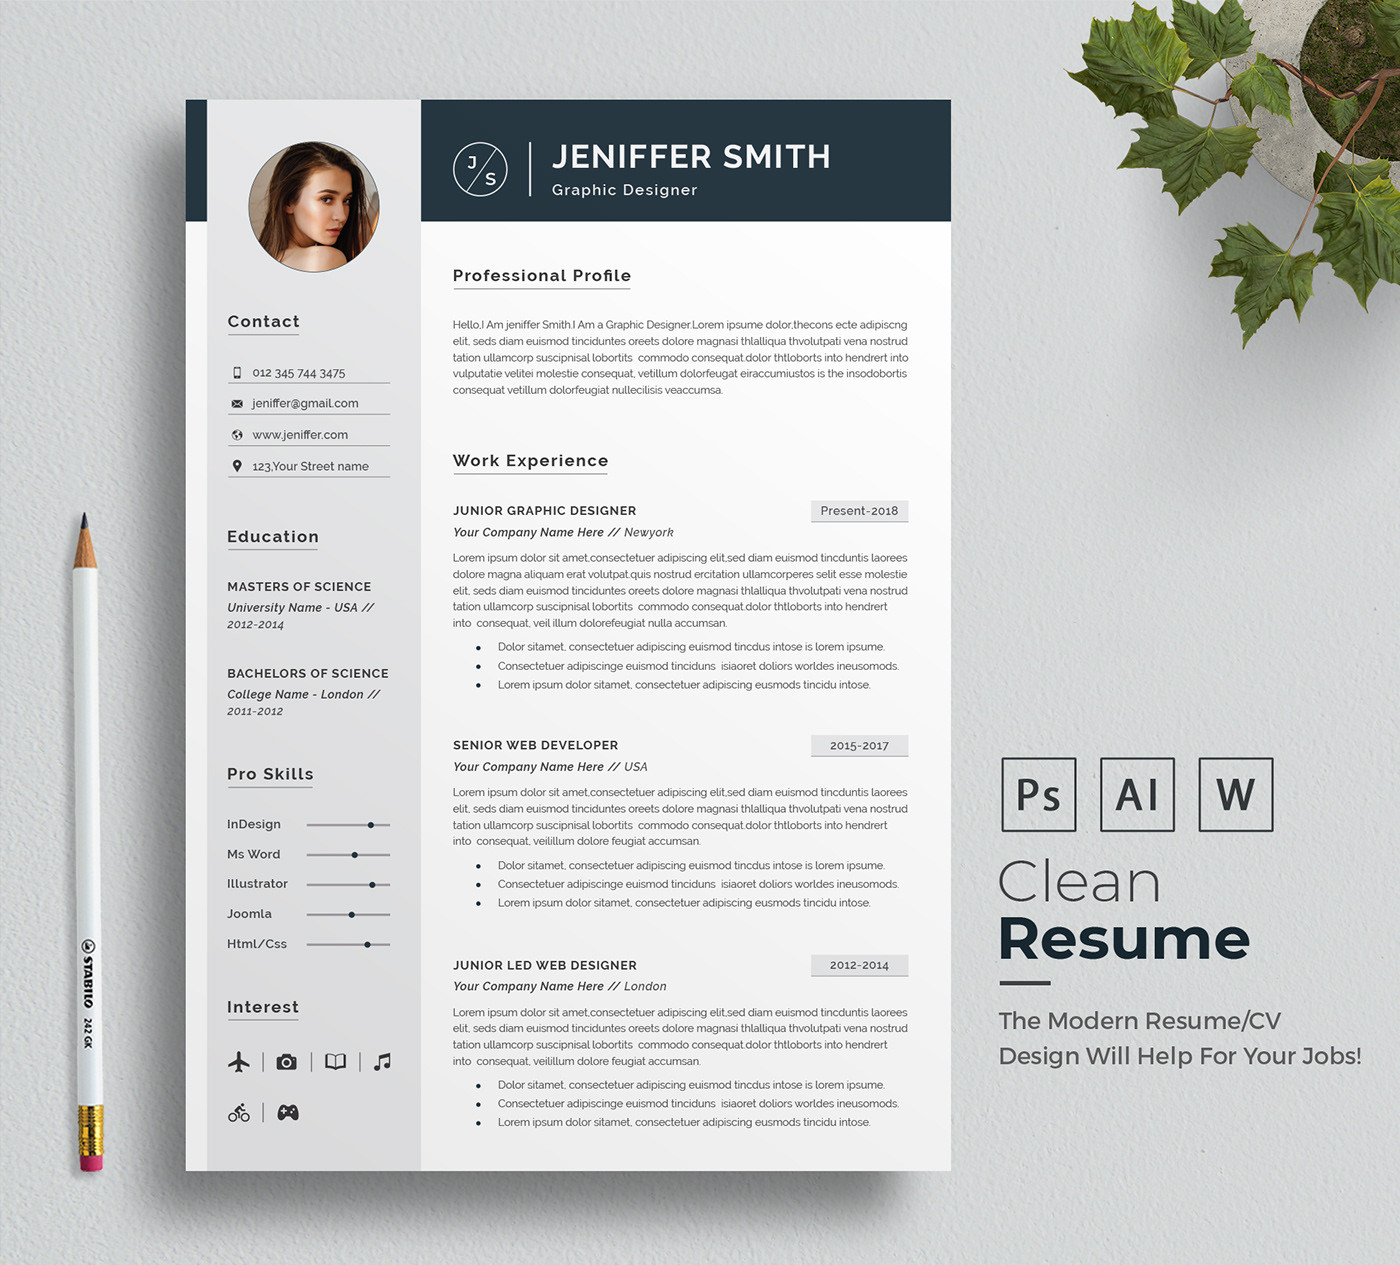 Resume Template Free Download with Picture Free Resume Templates Word On Behance